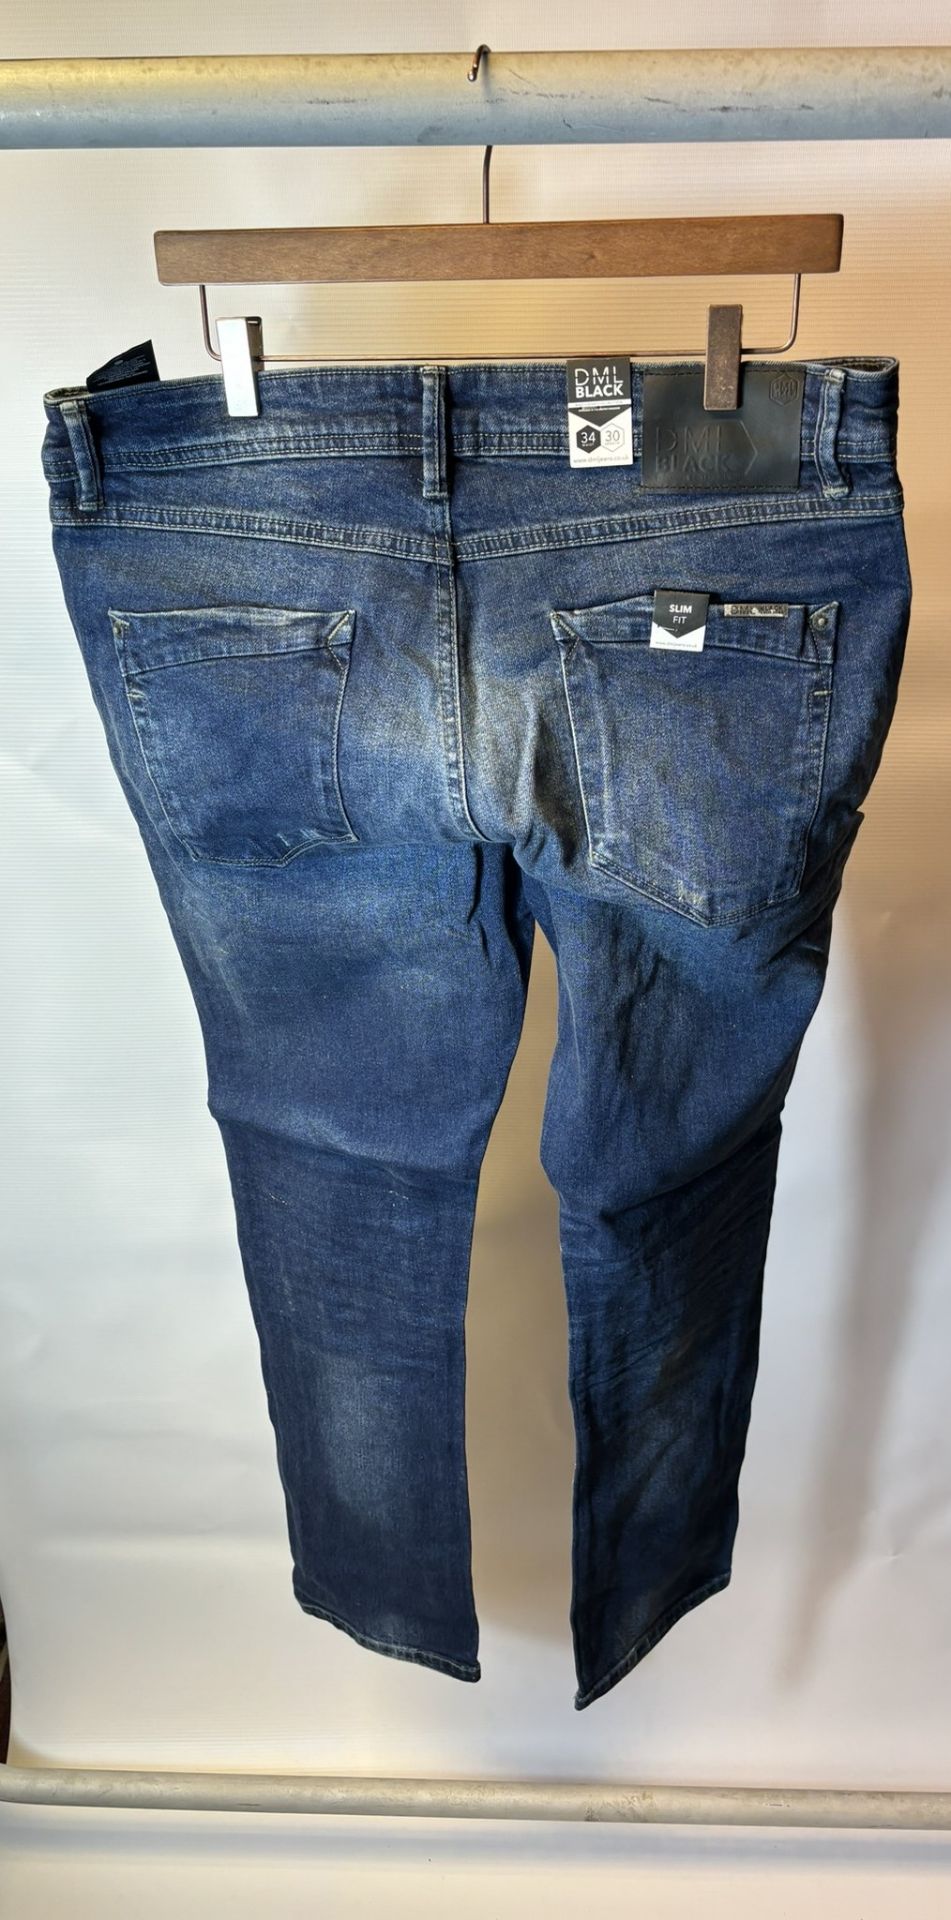 13 x Pairs Of various Sized DML Jeans Prophecy & Voyage Blue Jeans - Image 14 of 39